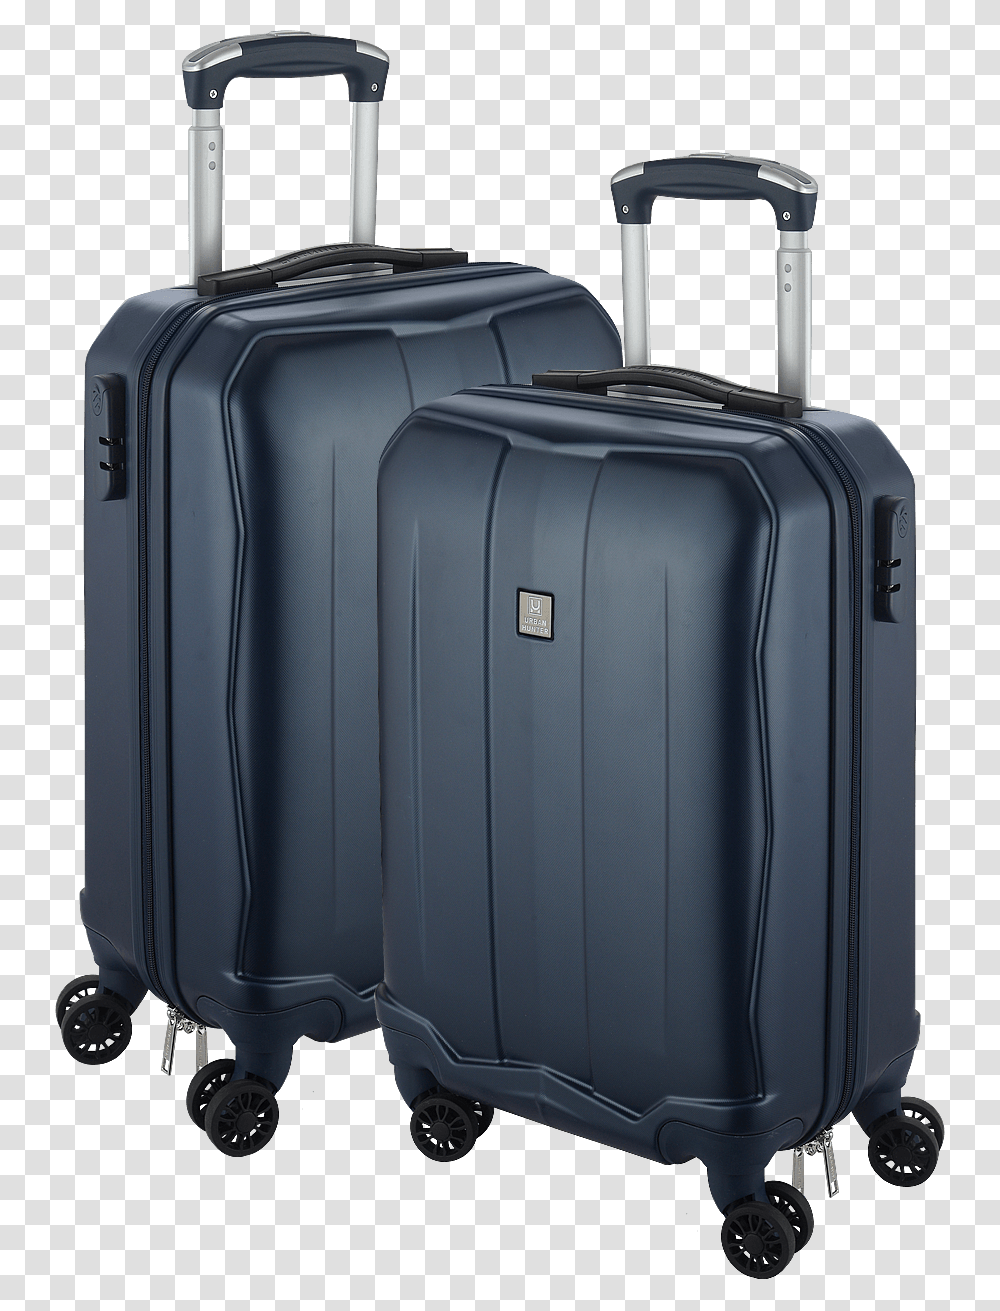 Thumb Image, Luggage, Suitcase Transparent Png